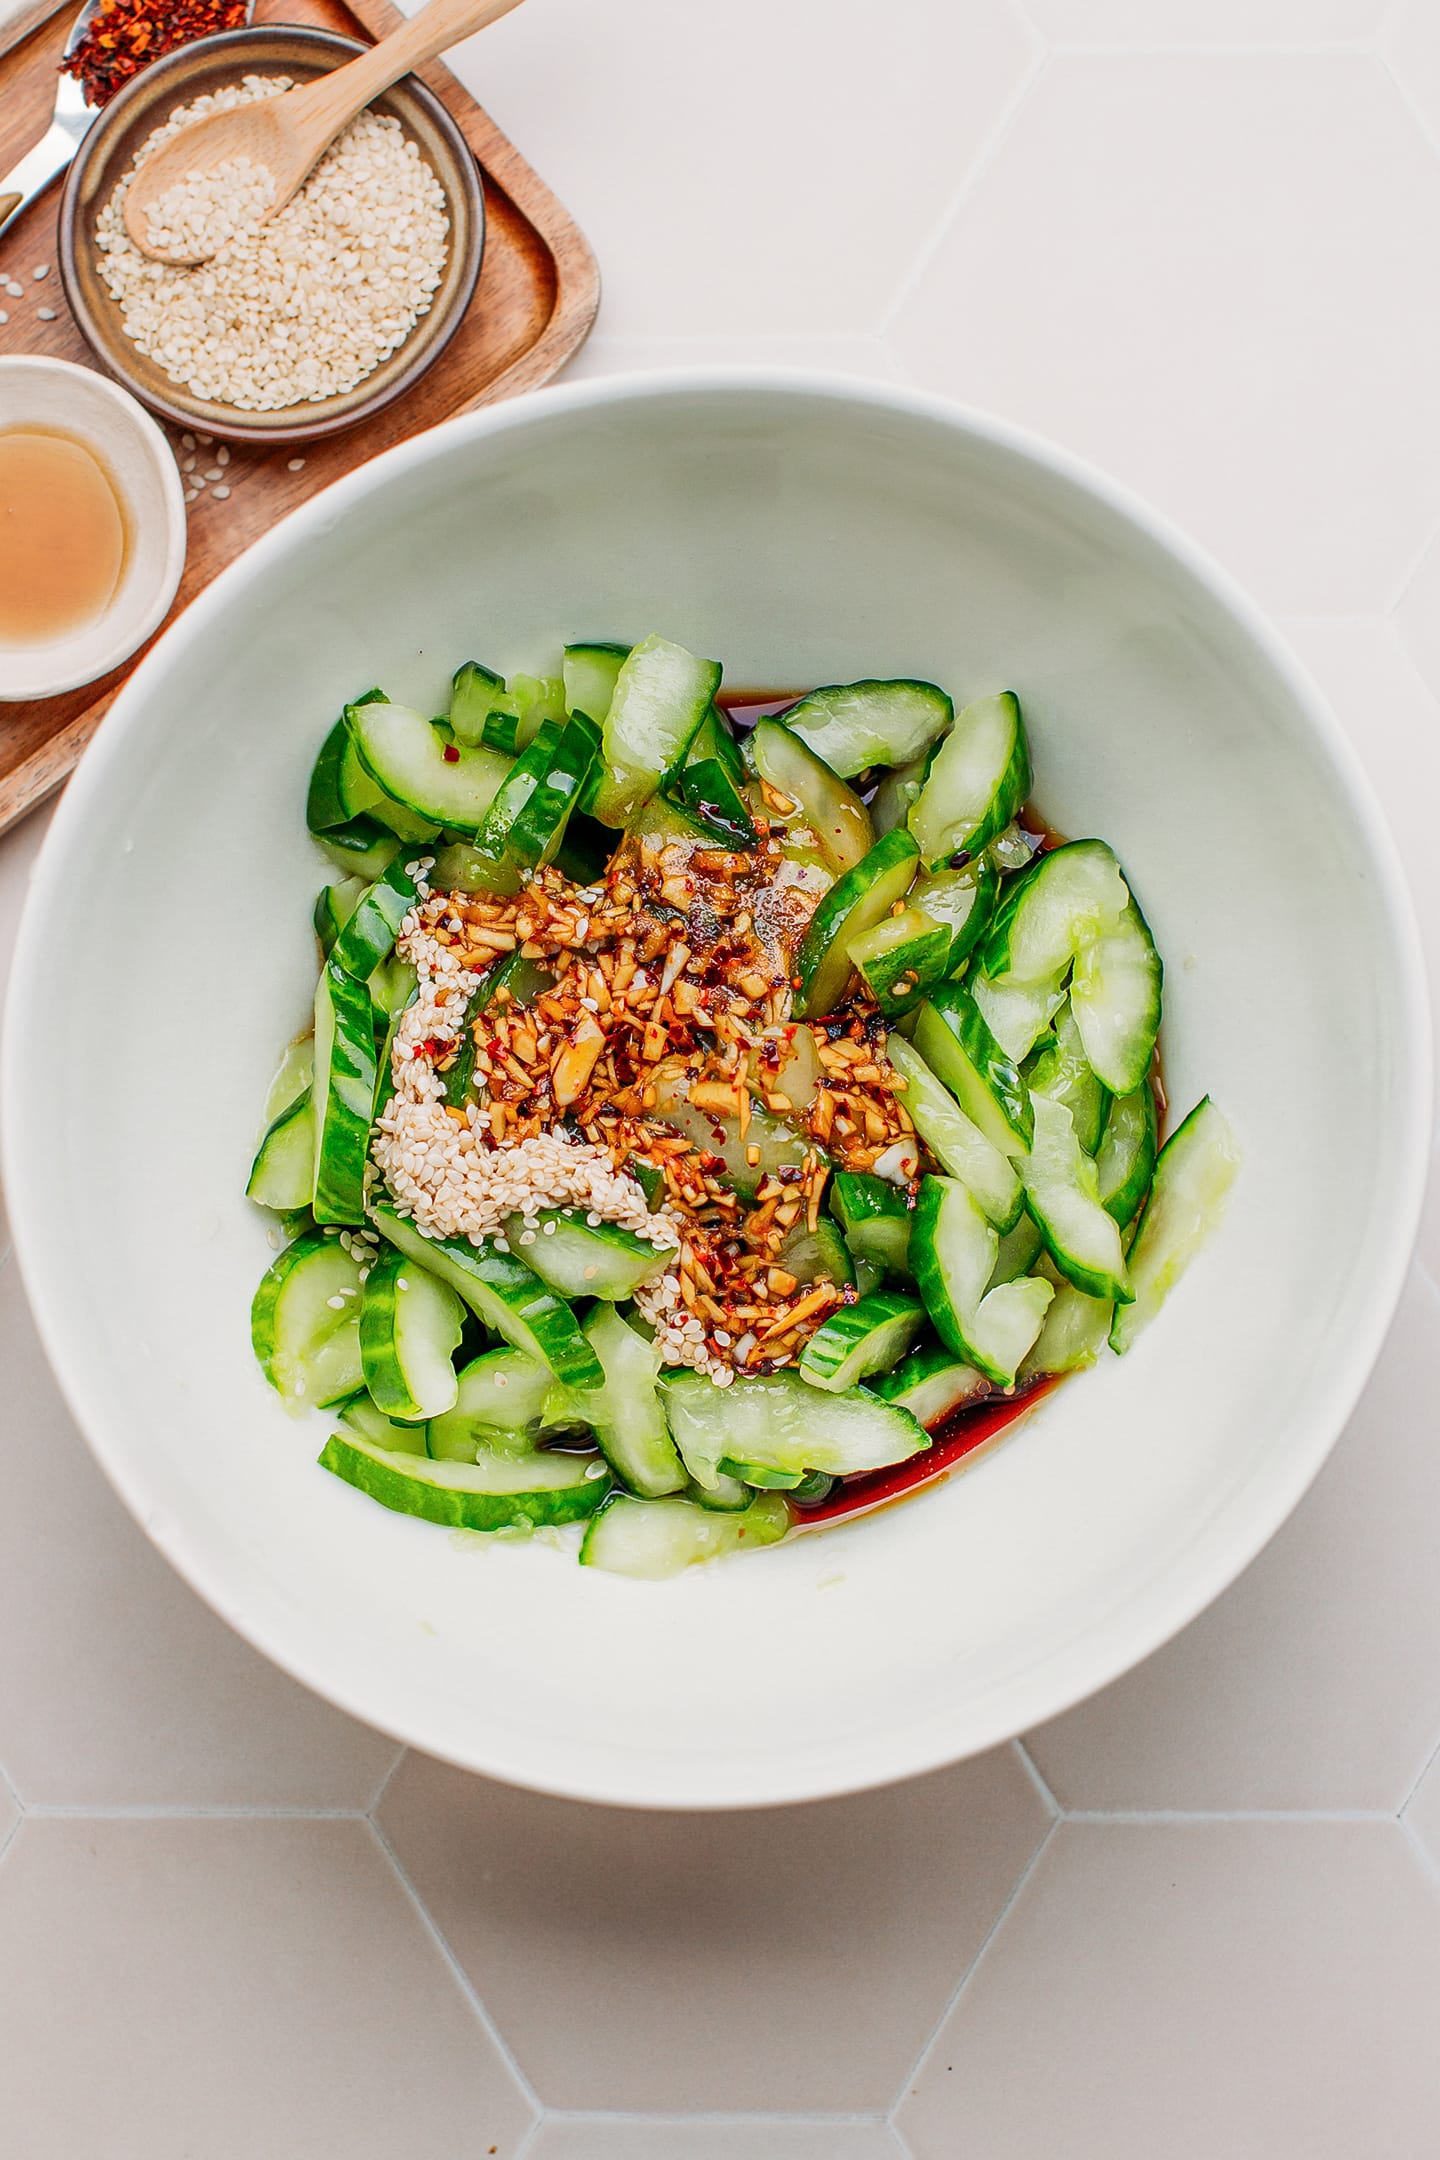 Smashed cucumbers, sesame seeds, soy sauce, and vinegar in a bowl.